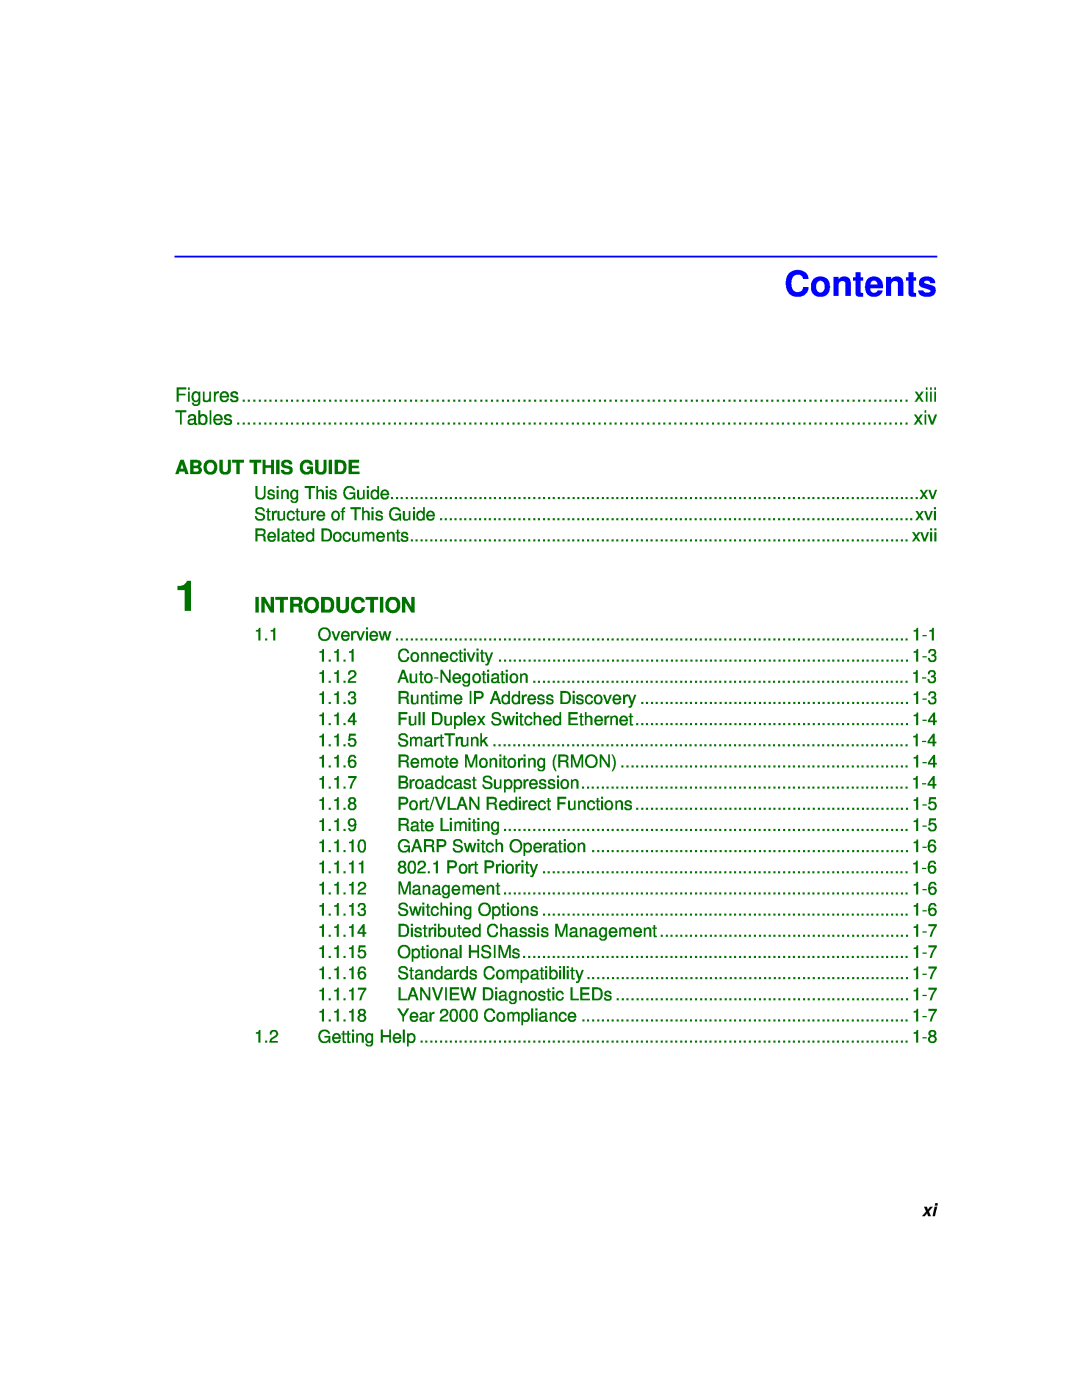 Cabletron Systems 6000 manual Contents, Introduction, Figures, xiii, Tables, About This Guide 